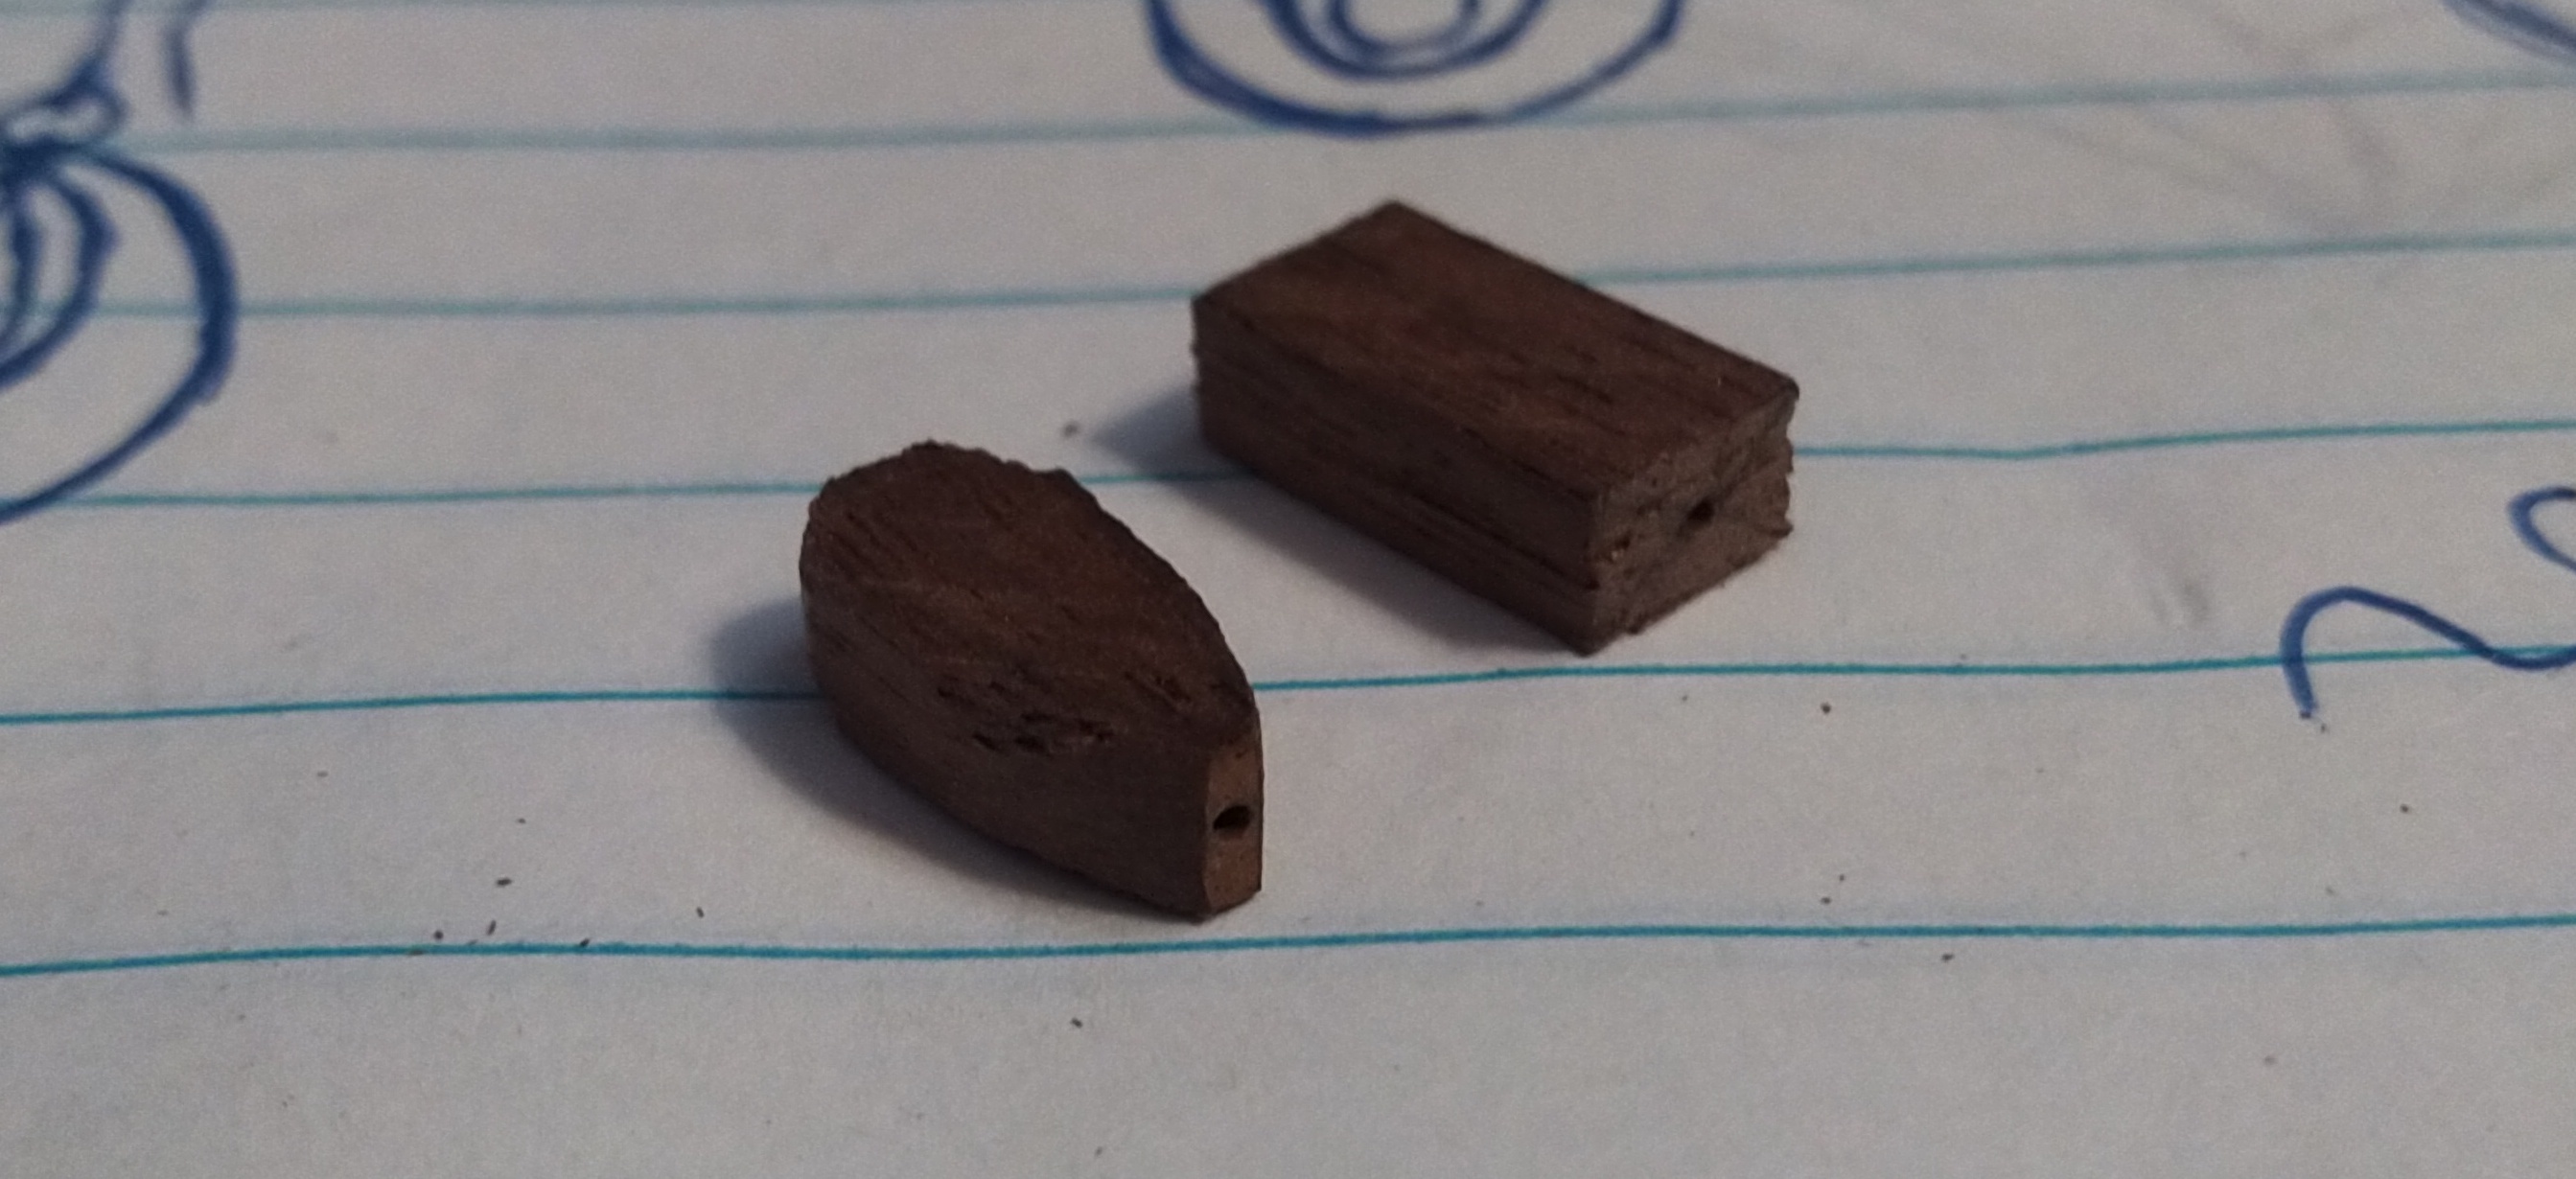 Two very small pieces of walnut wood. One is rectangular and the other has been rounded to a teardrop shape.